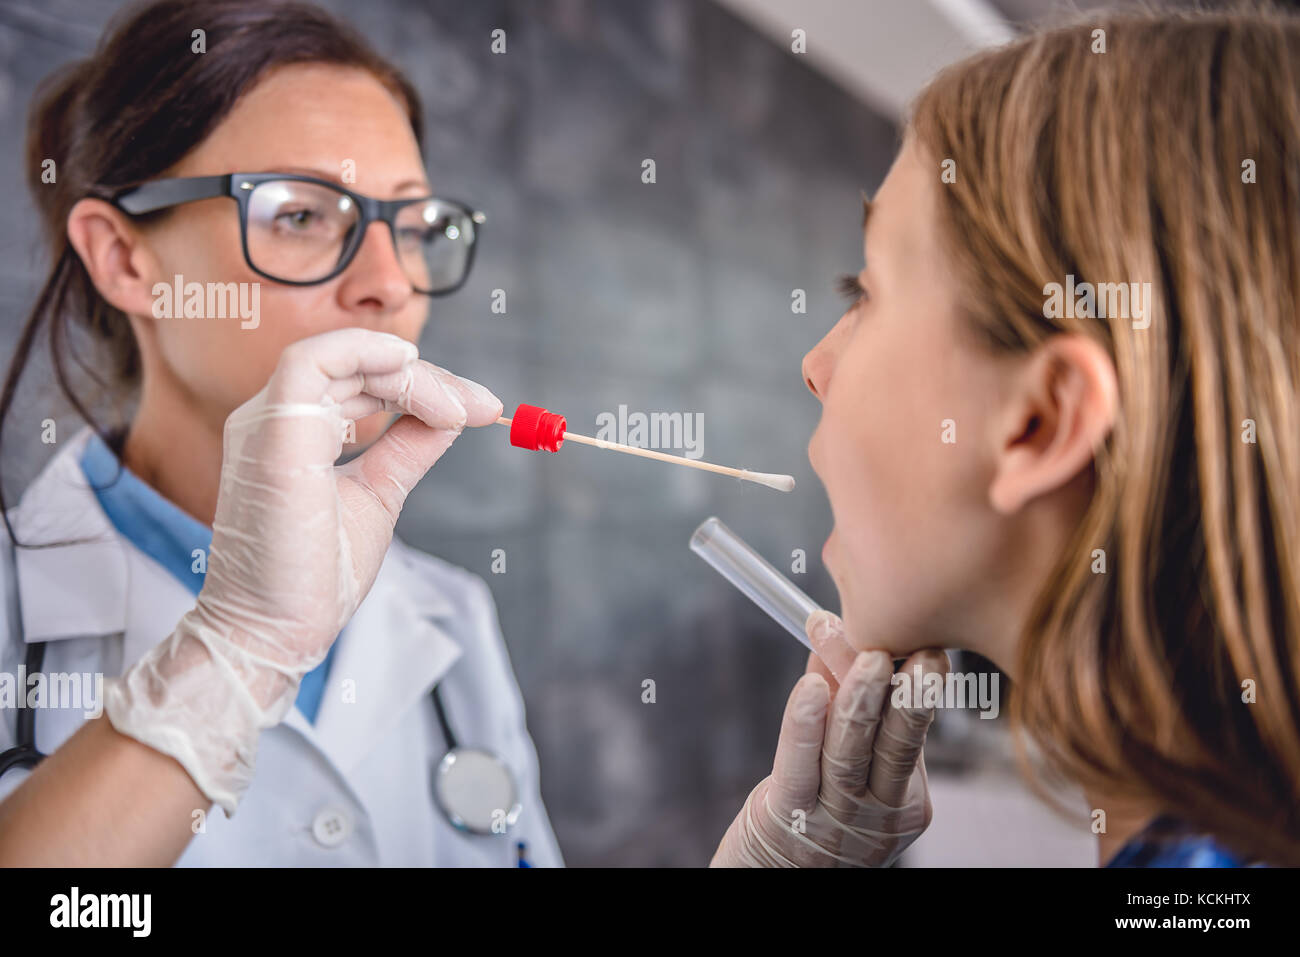 Female pediatrician using a swab to take a sample from a patient's throat Stock Photo